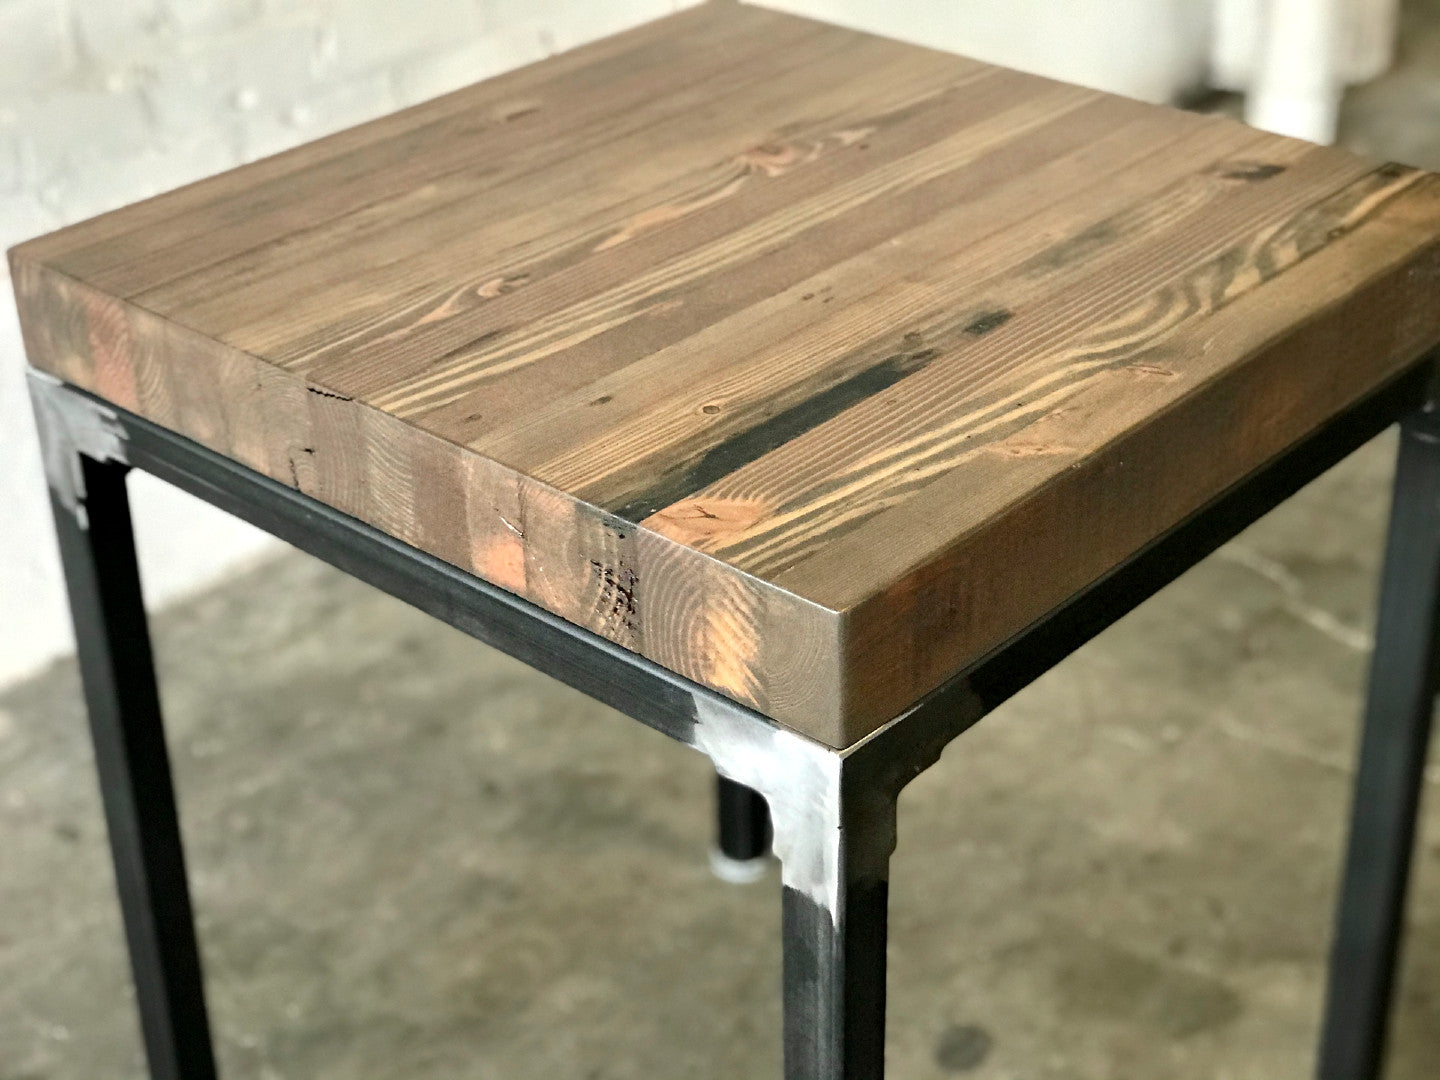 Grand Boulevard Industrial Reclaimed Wood Cafe Table w/Briarsmoke Stain